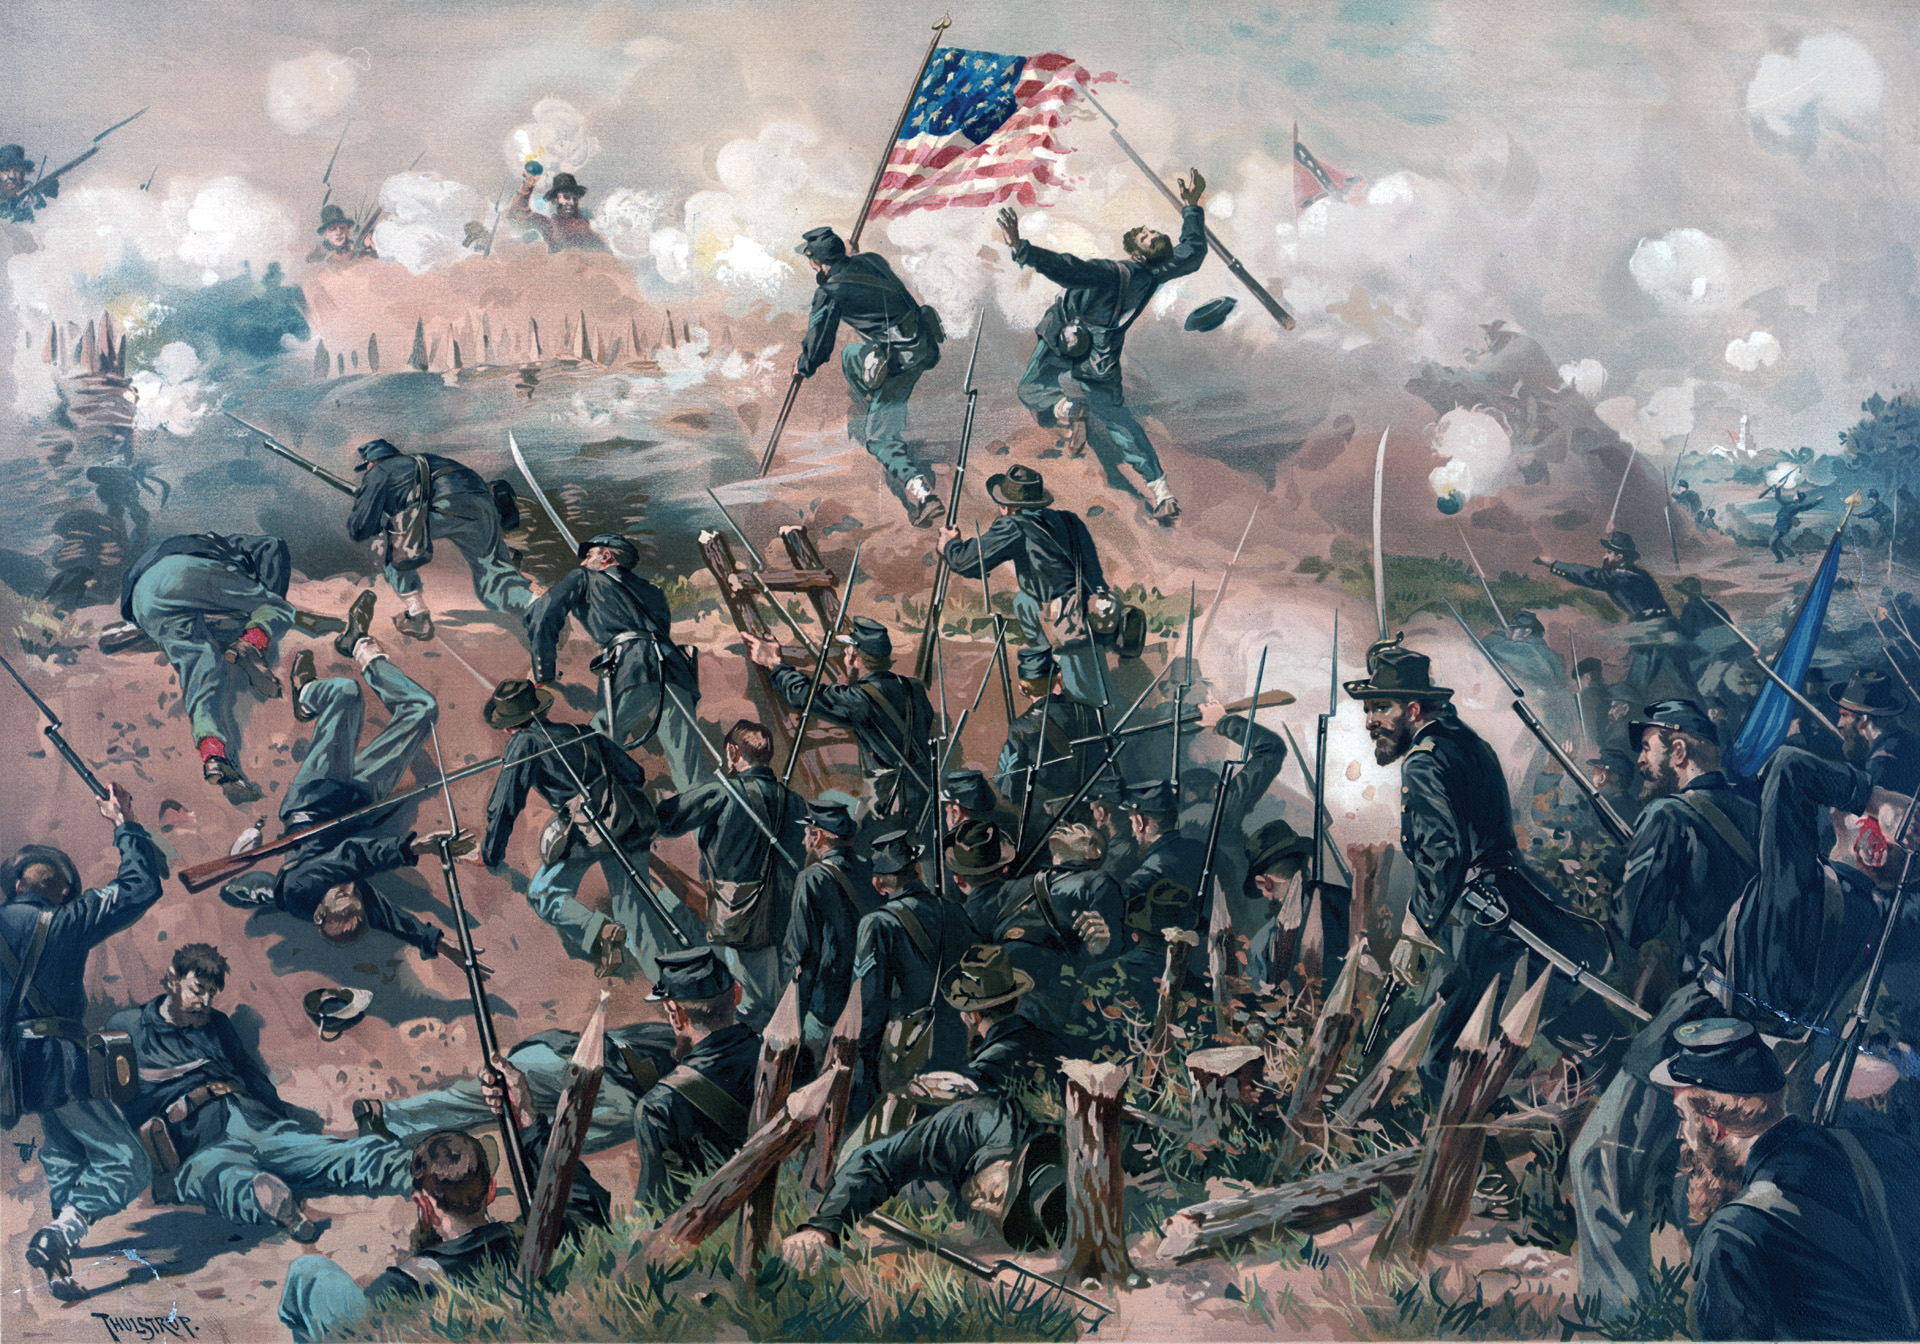 Union troops assault Confederate earthworks at Vicksburg on May 19, 1863, in the first of two major attacks that resulted in heavy losses. Isolation and starvation ultimately compelled the Confederates to surrender.